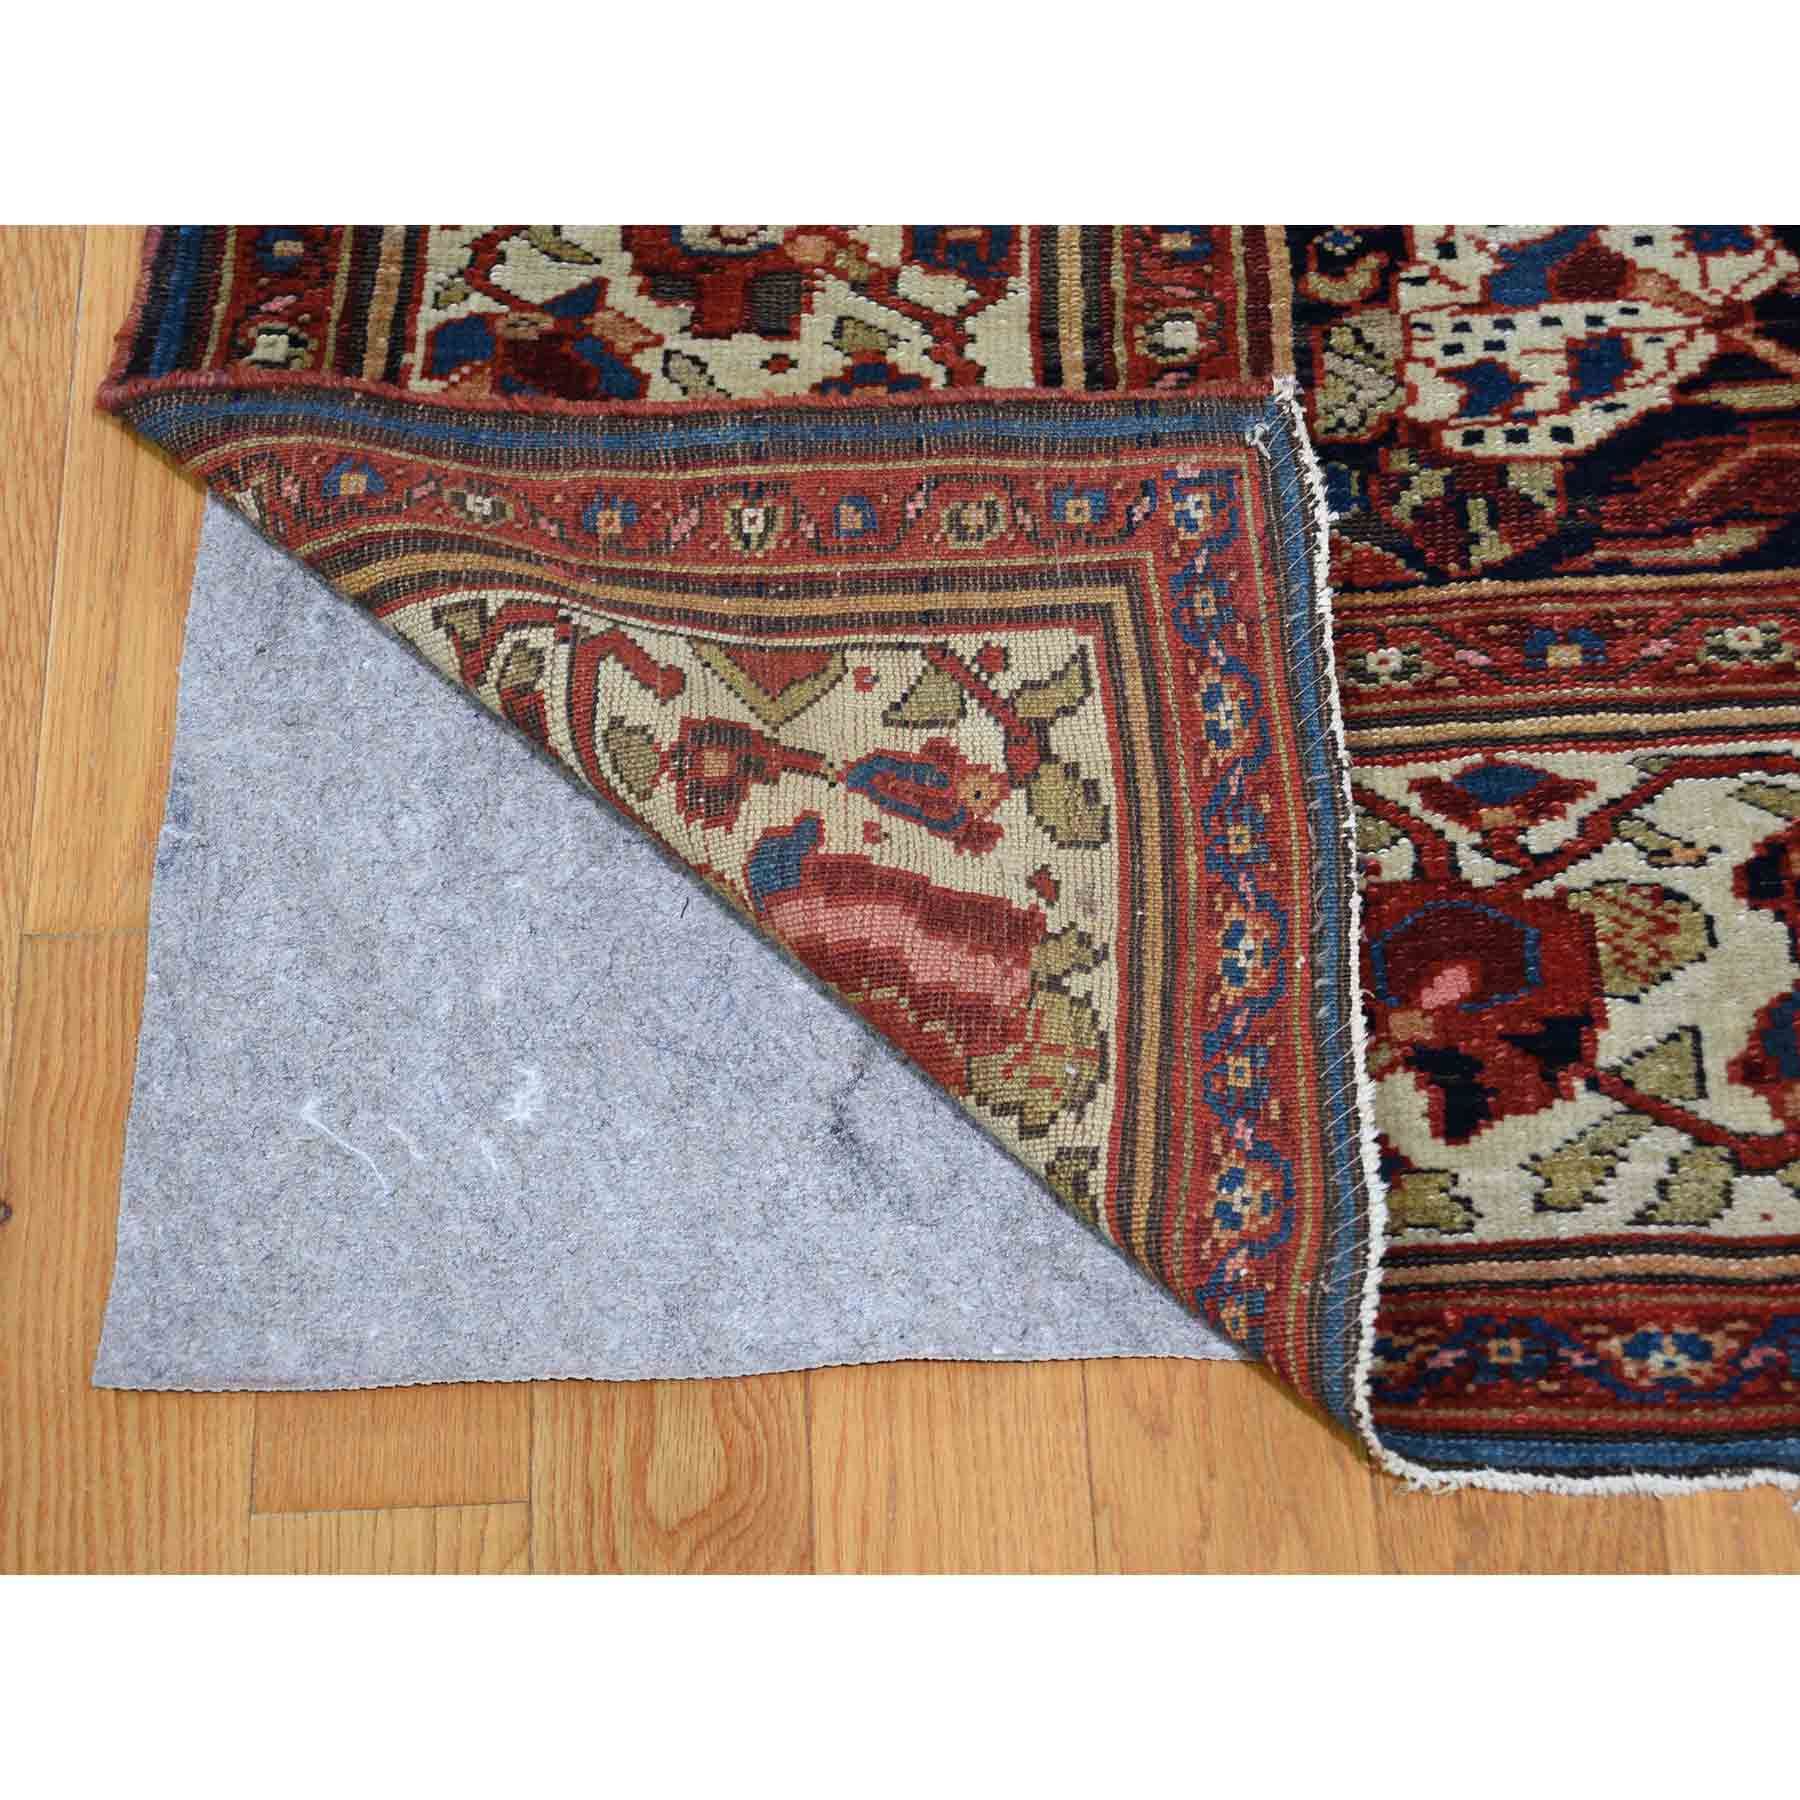 Antique-Hand-Knotted-Rug-232210